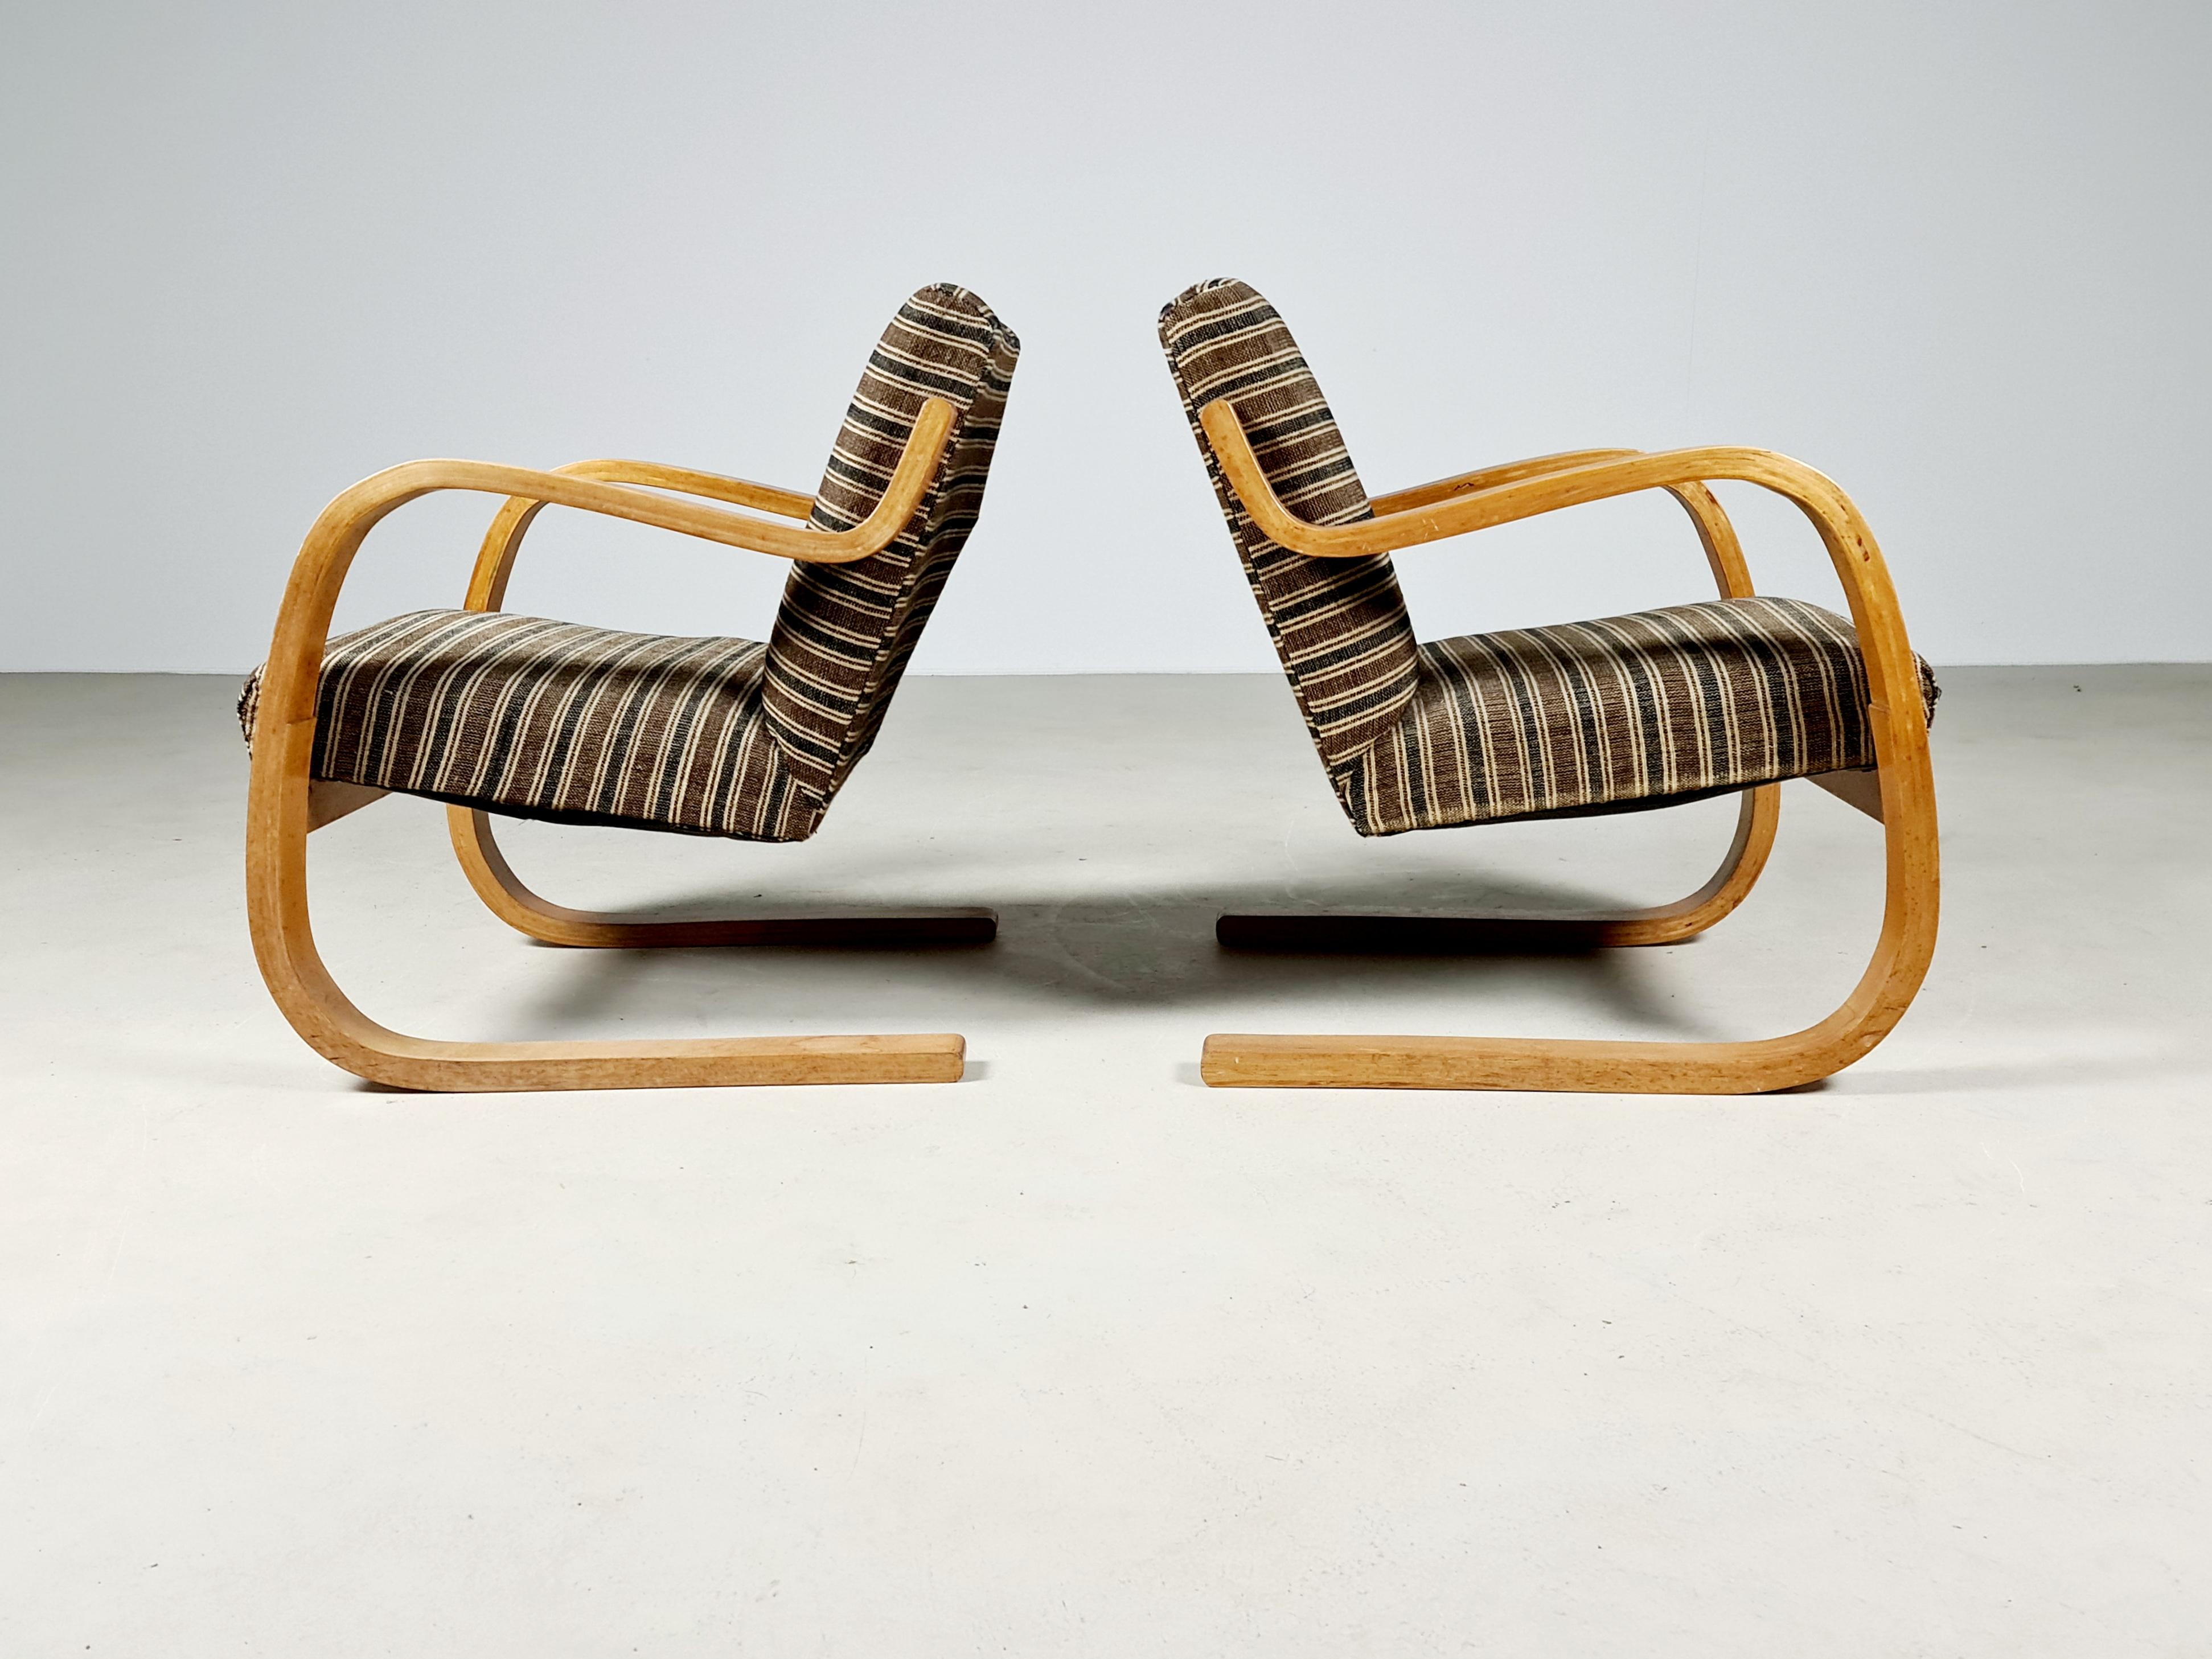 402 Chair, Alvar Aalto, Finmar, 1933

The 402 armchair was designed by Alvar Aalto in 1933. Aalto was a famous architect and one of the most influential modern Scandinavian designers. The frame of the chairs are made of birch wood and have their